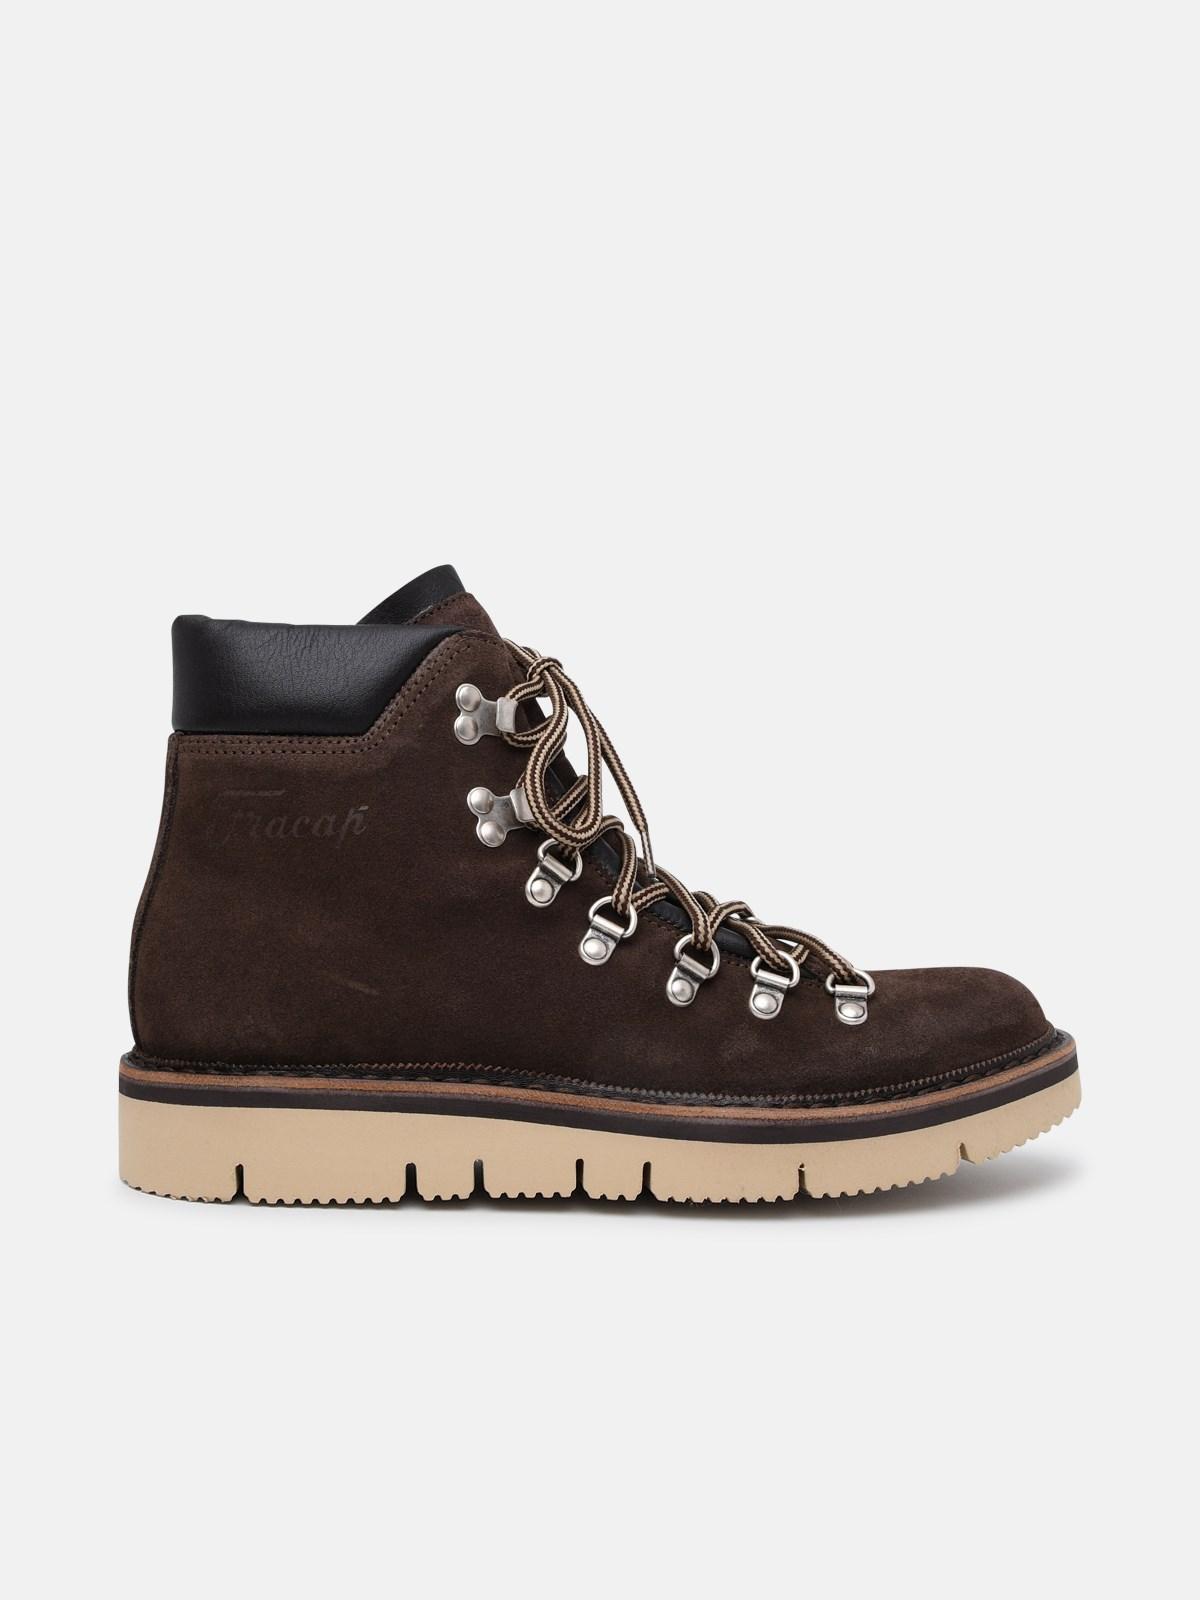 Fracap A300 Suede Boots in Brown for Men | Lyst